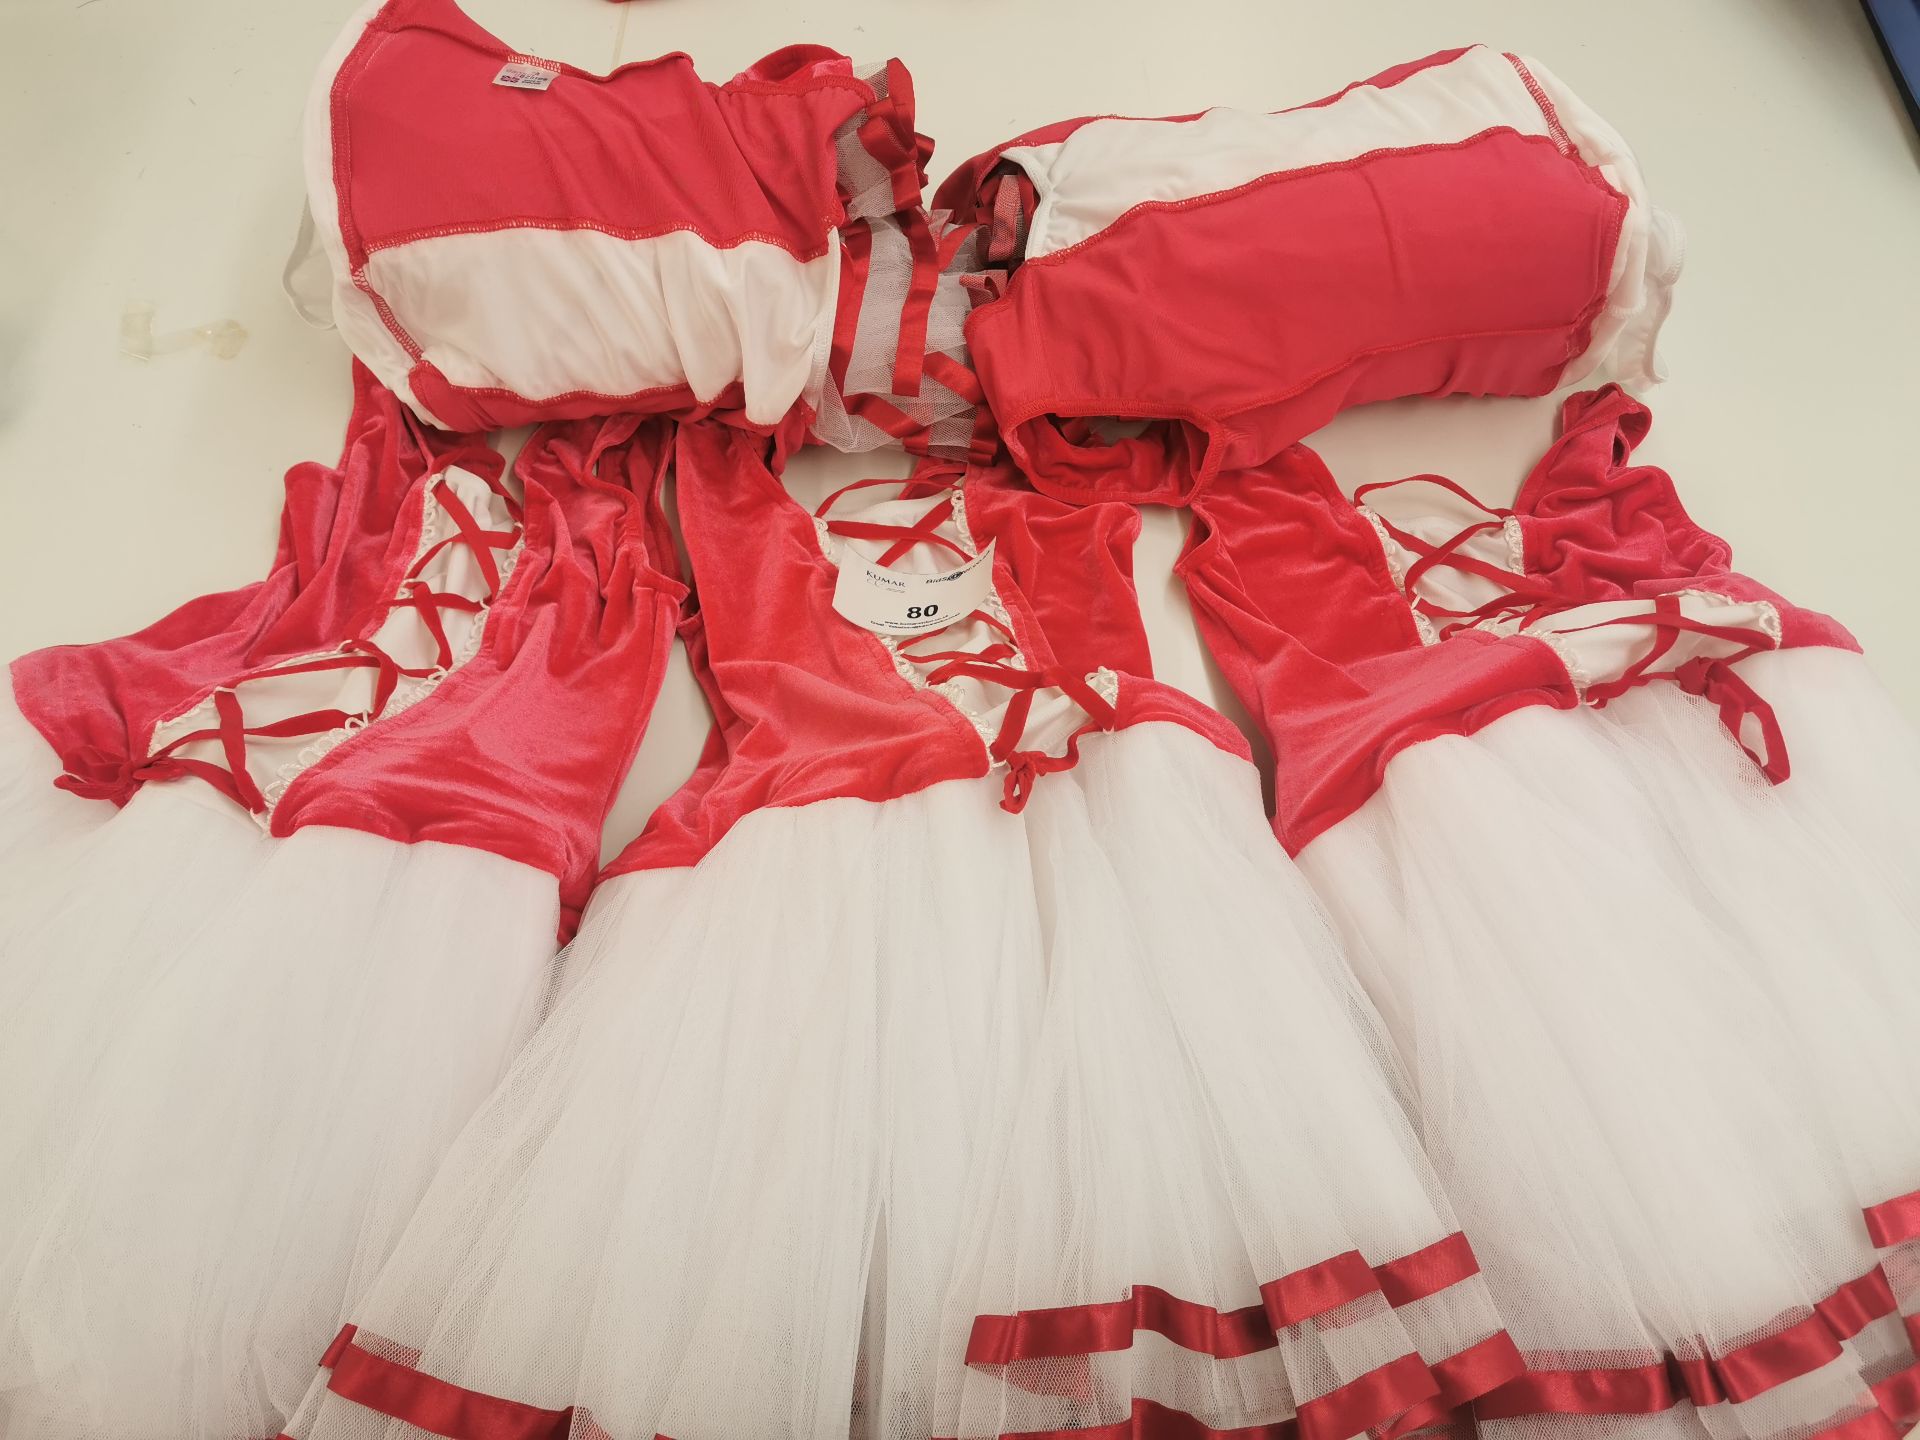 5pc Red and white tutu dresses.Various sizes and designs